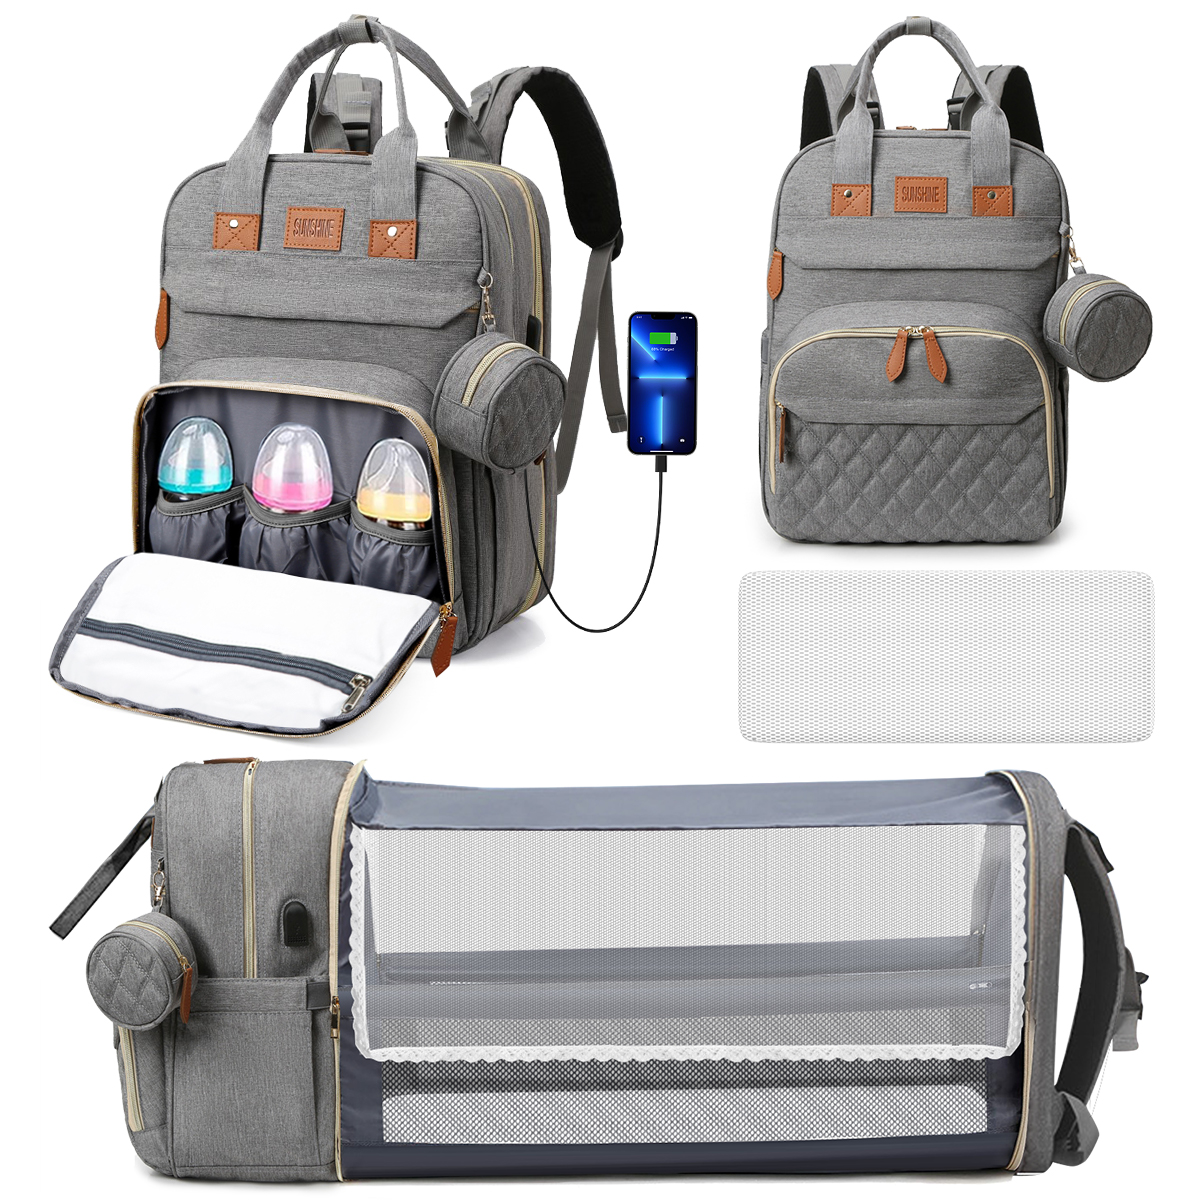 Diaper Bag Backpack, Multifunction Baby Diaper Bag with Changing Station, Large Capacity Waterproof Travel Backpack w/ Pacifier Case & USB Charging, Baby Stuff Organizer, Unisex Shower Gifts(Grey) - image 1 of 7